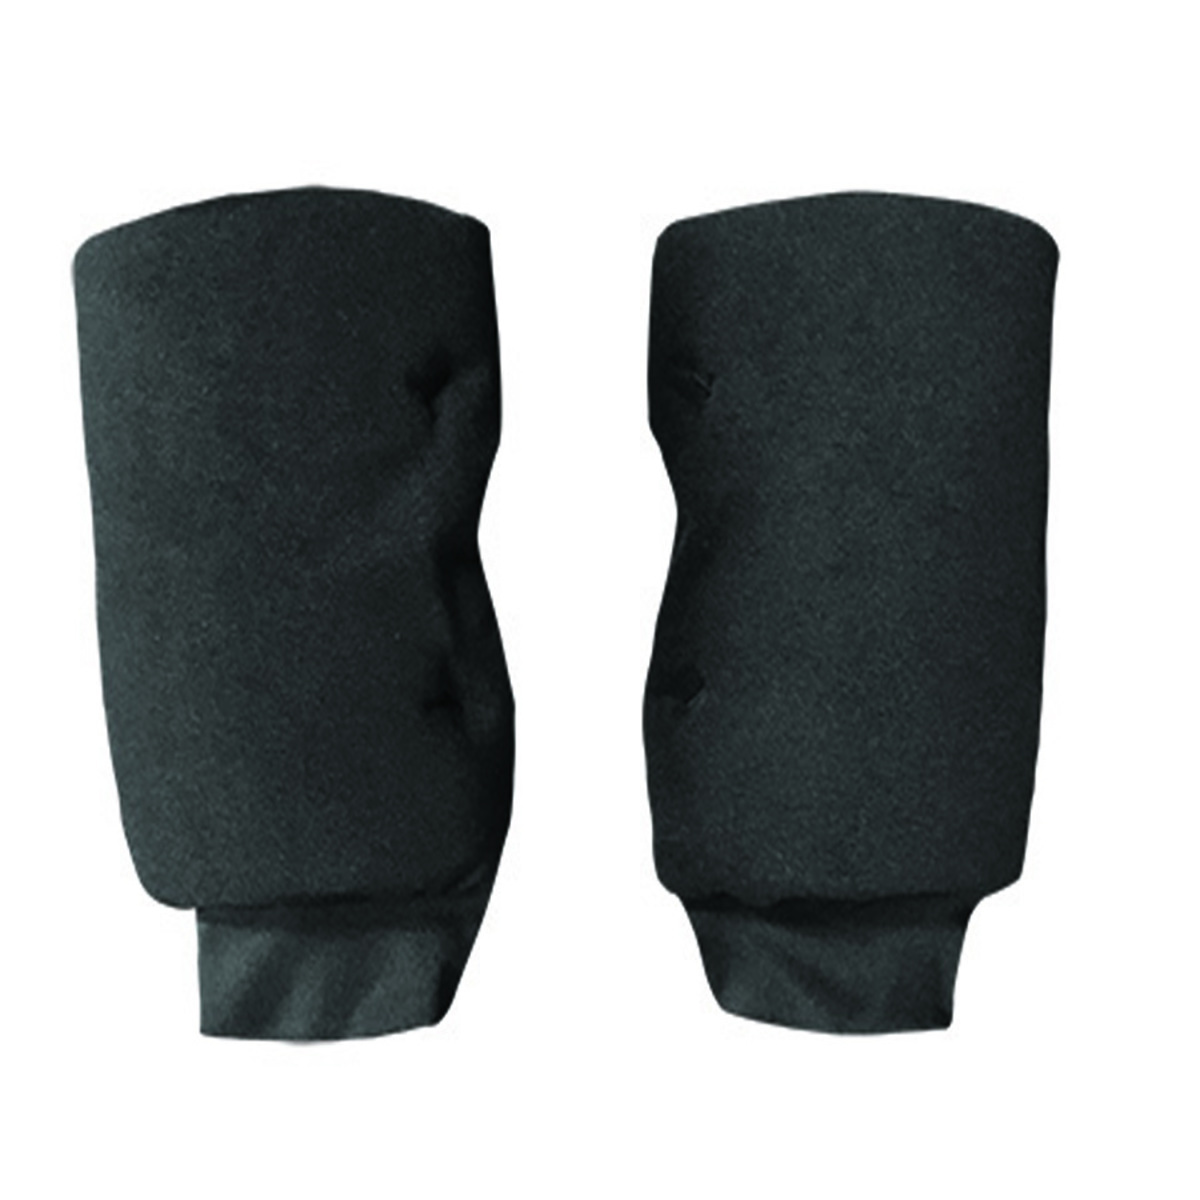 OccuNomix X-Large Black OccuNomix Polyester/Foam Knee Pad